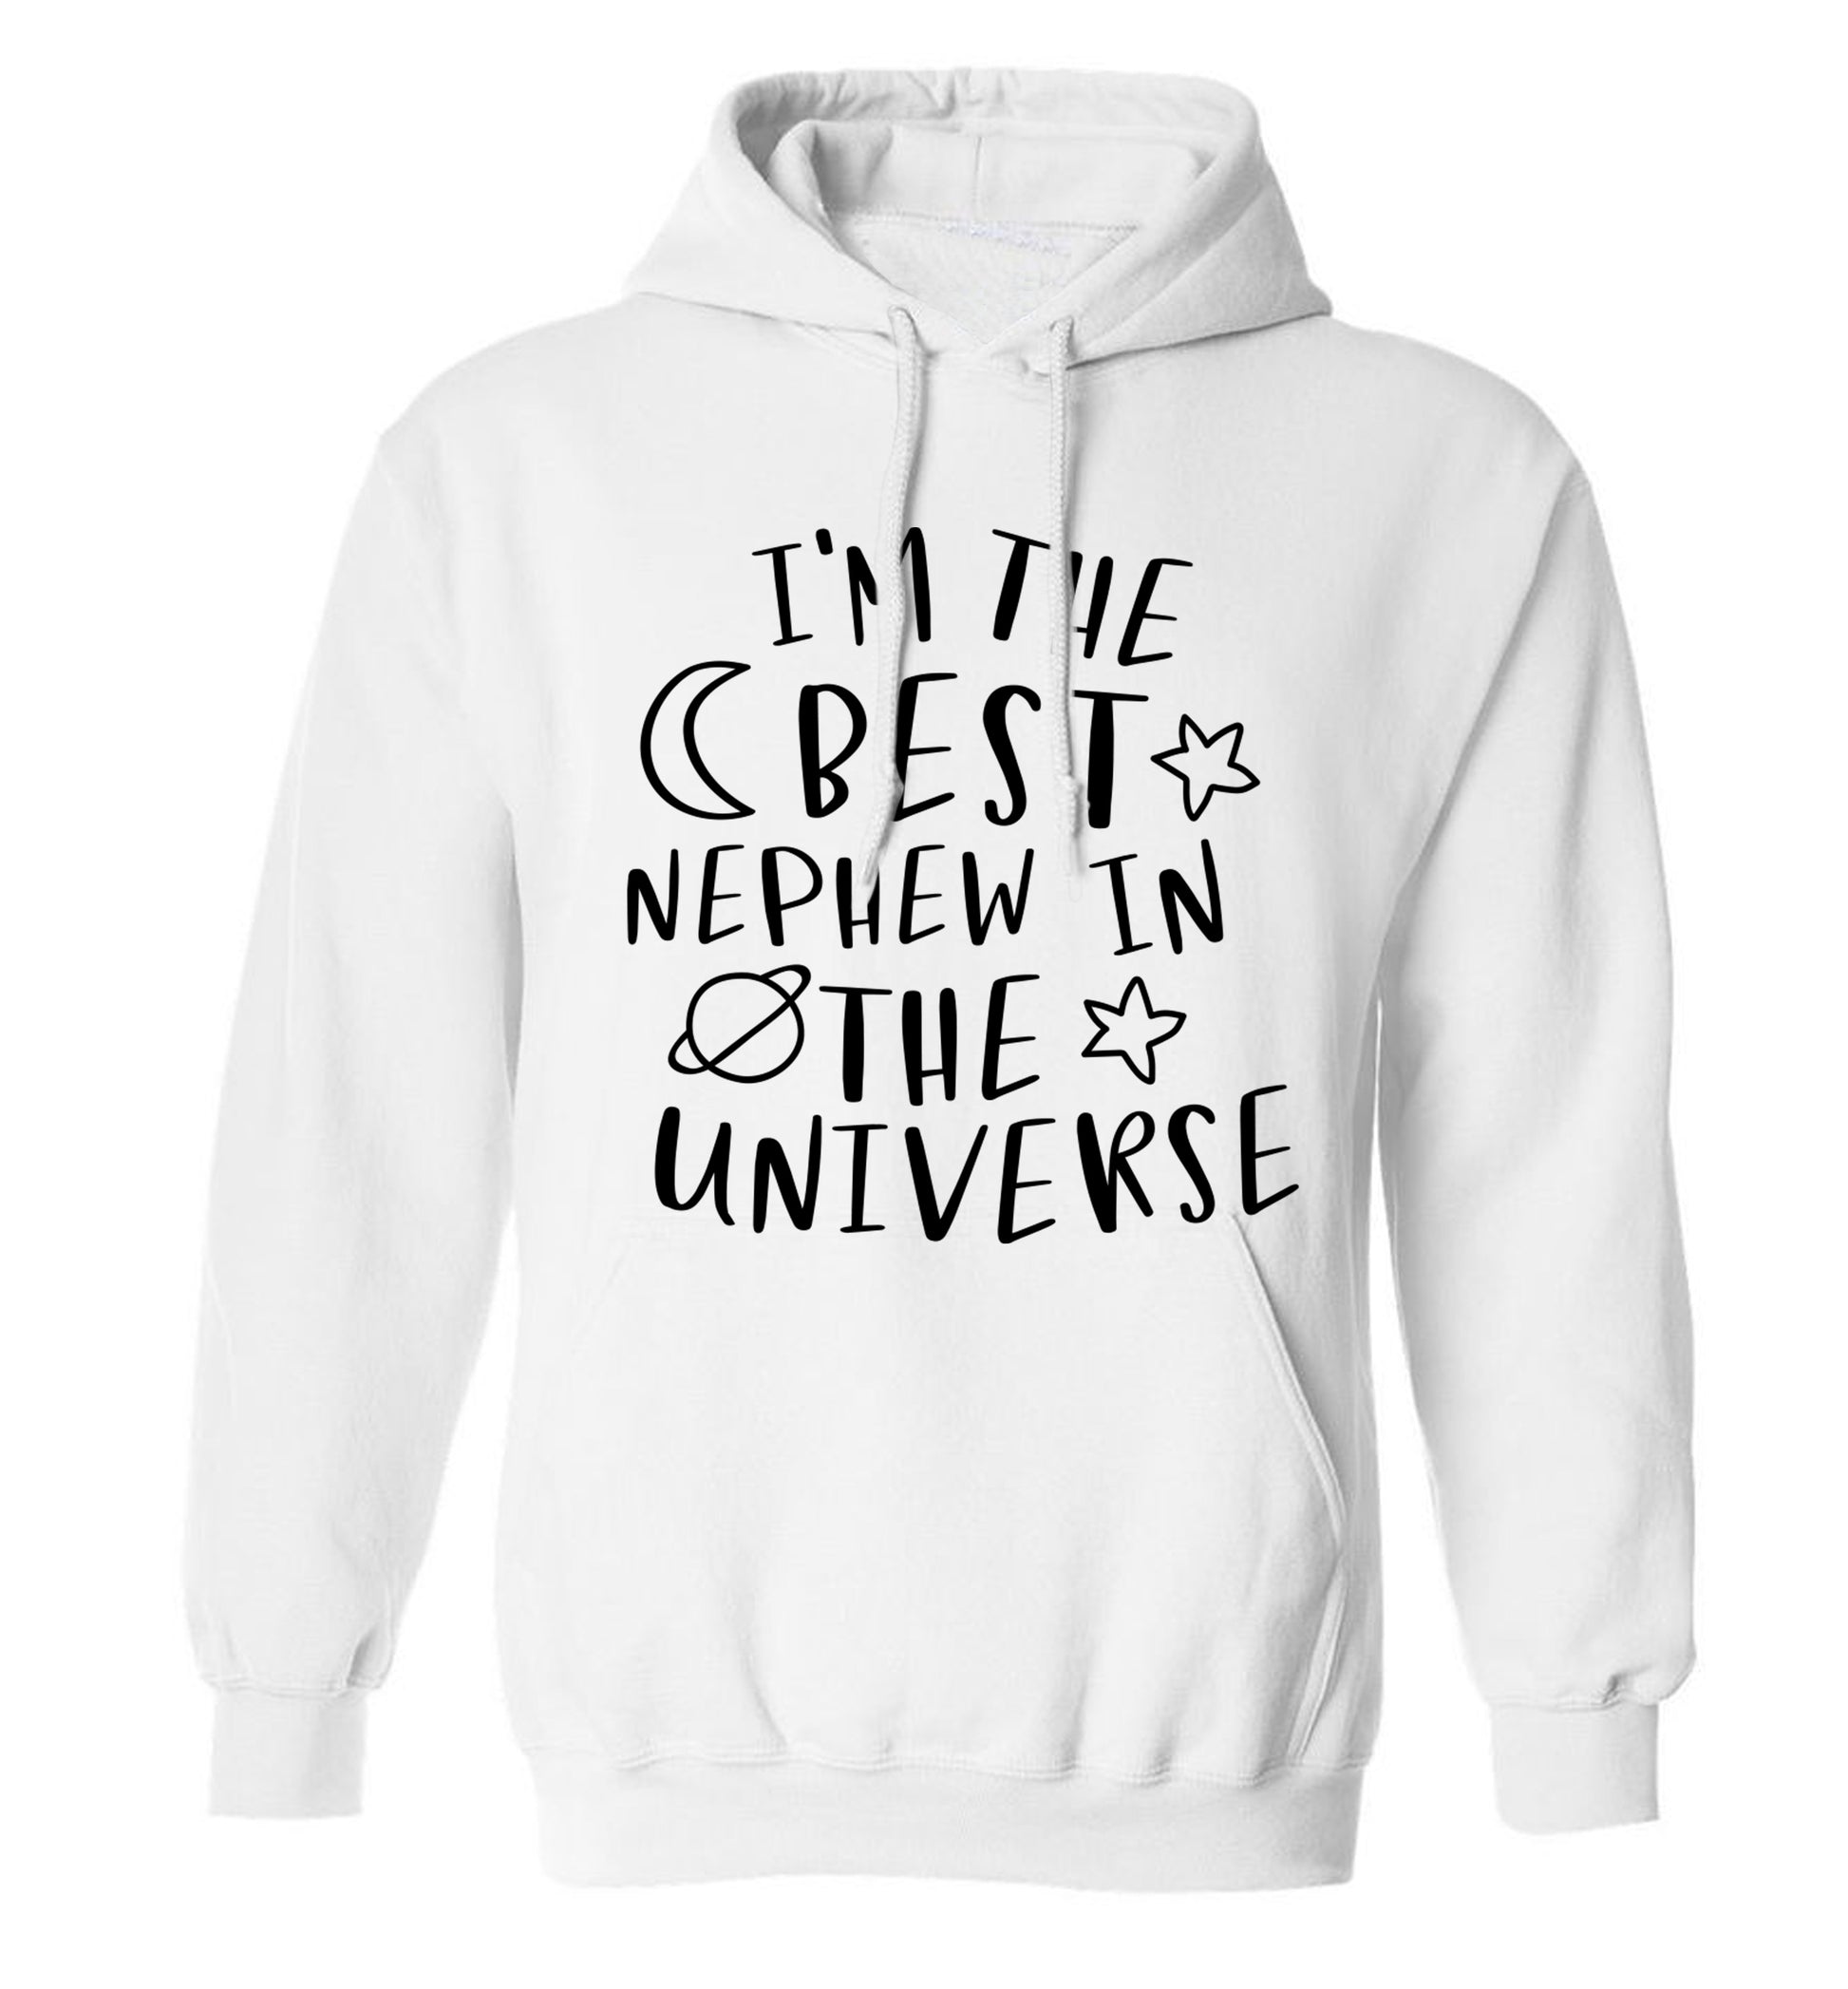 I'm the best nephew in the universe adults unisex white hoodie 2XL